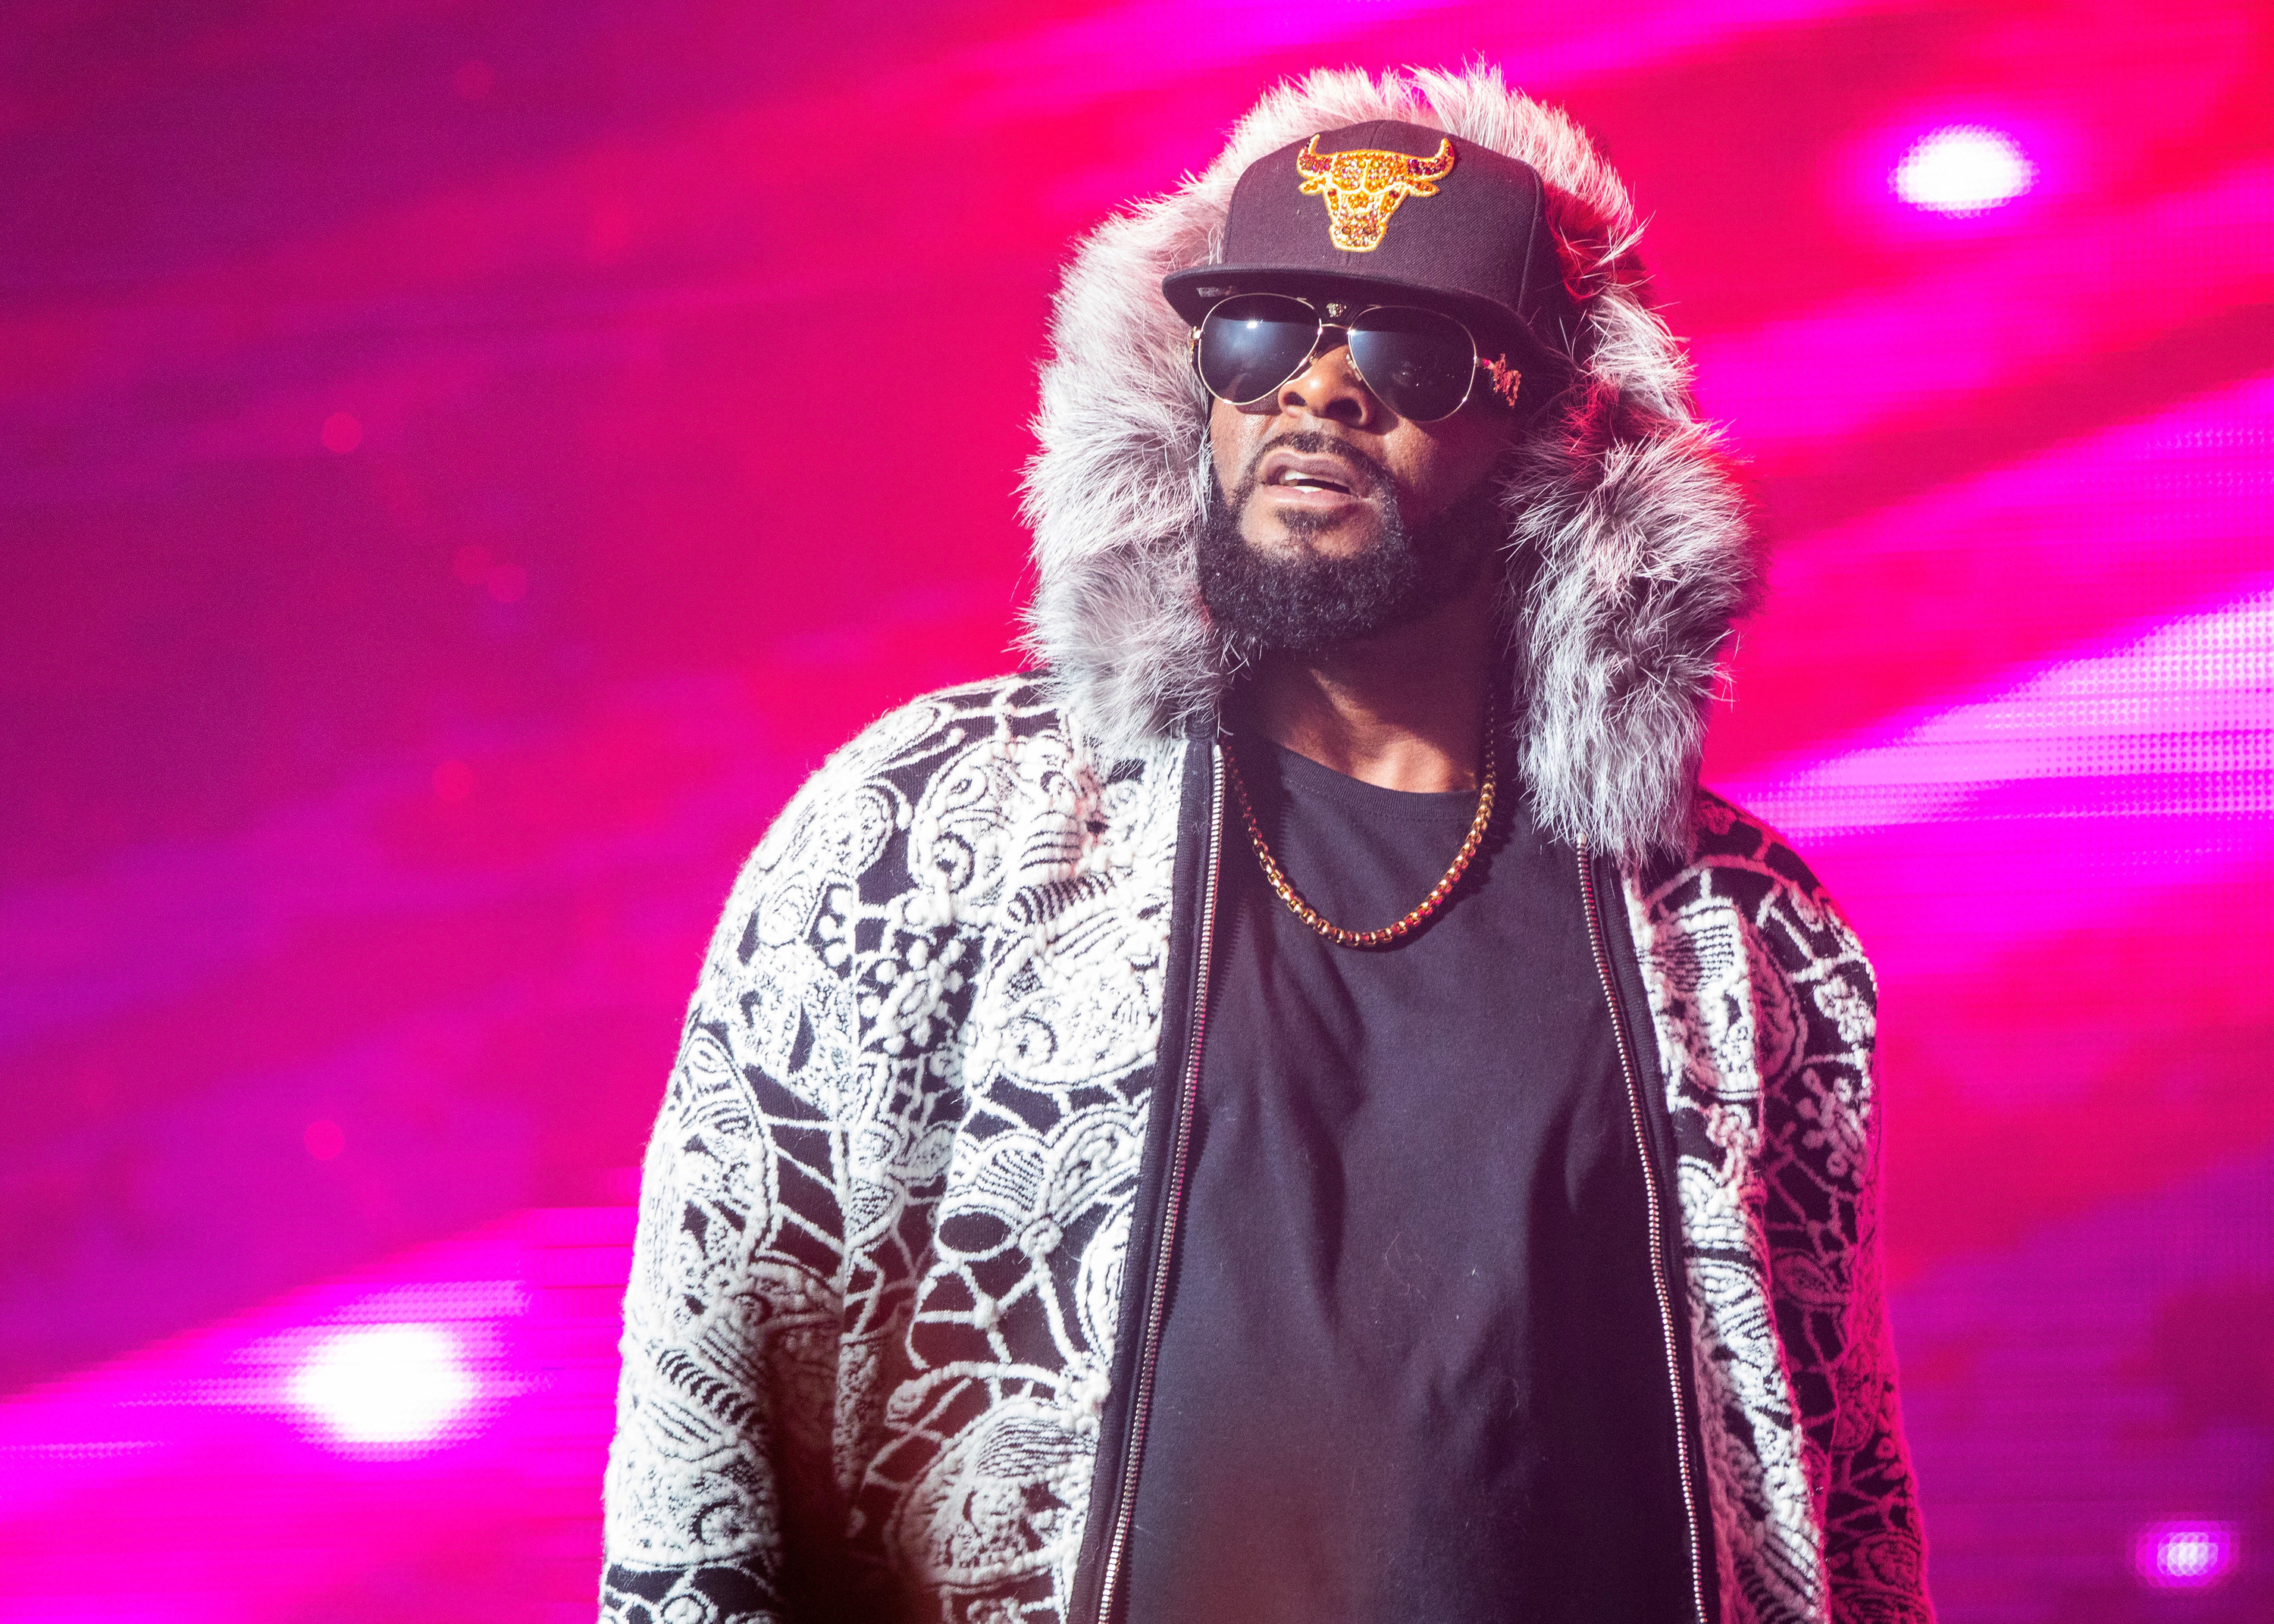 R. Kelly performs on stage